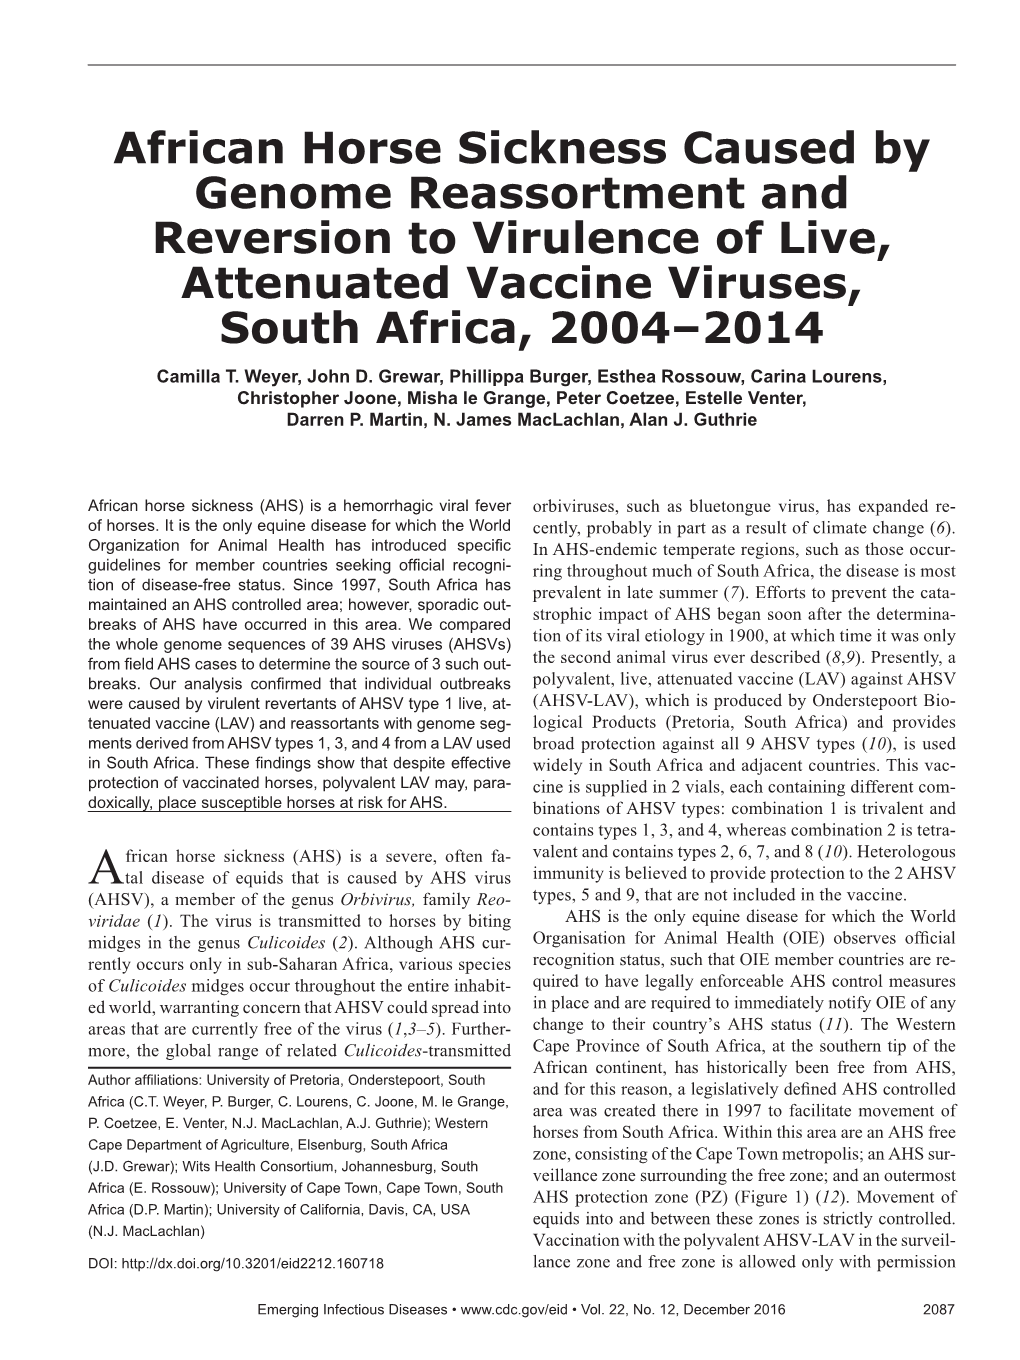 African Horse Sickness Caused by Genome Reassortment and Reversion to Virulence of Live, Attenuated Vaccine Viruses, South Africa, 2004–2014 Camilla T